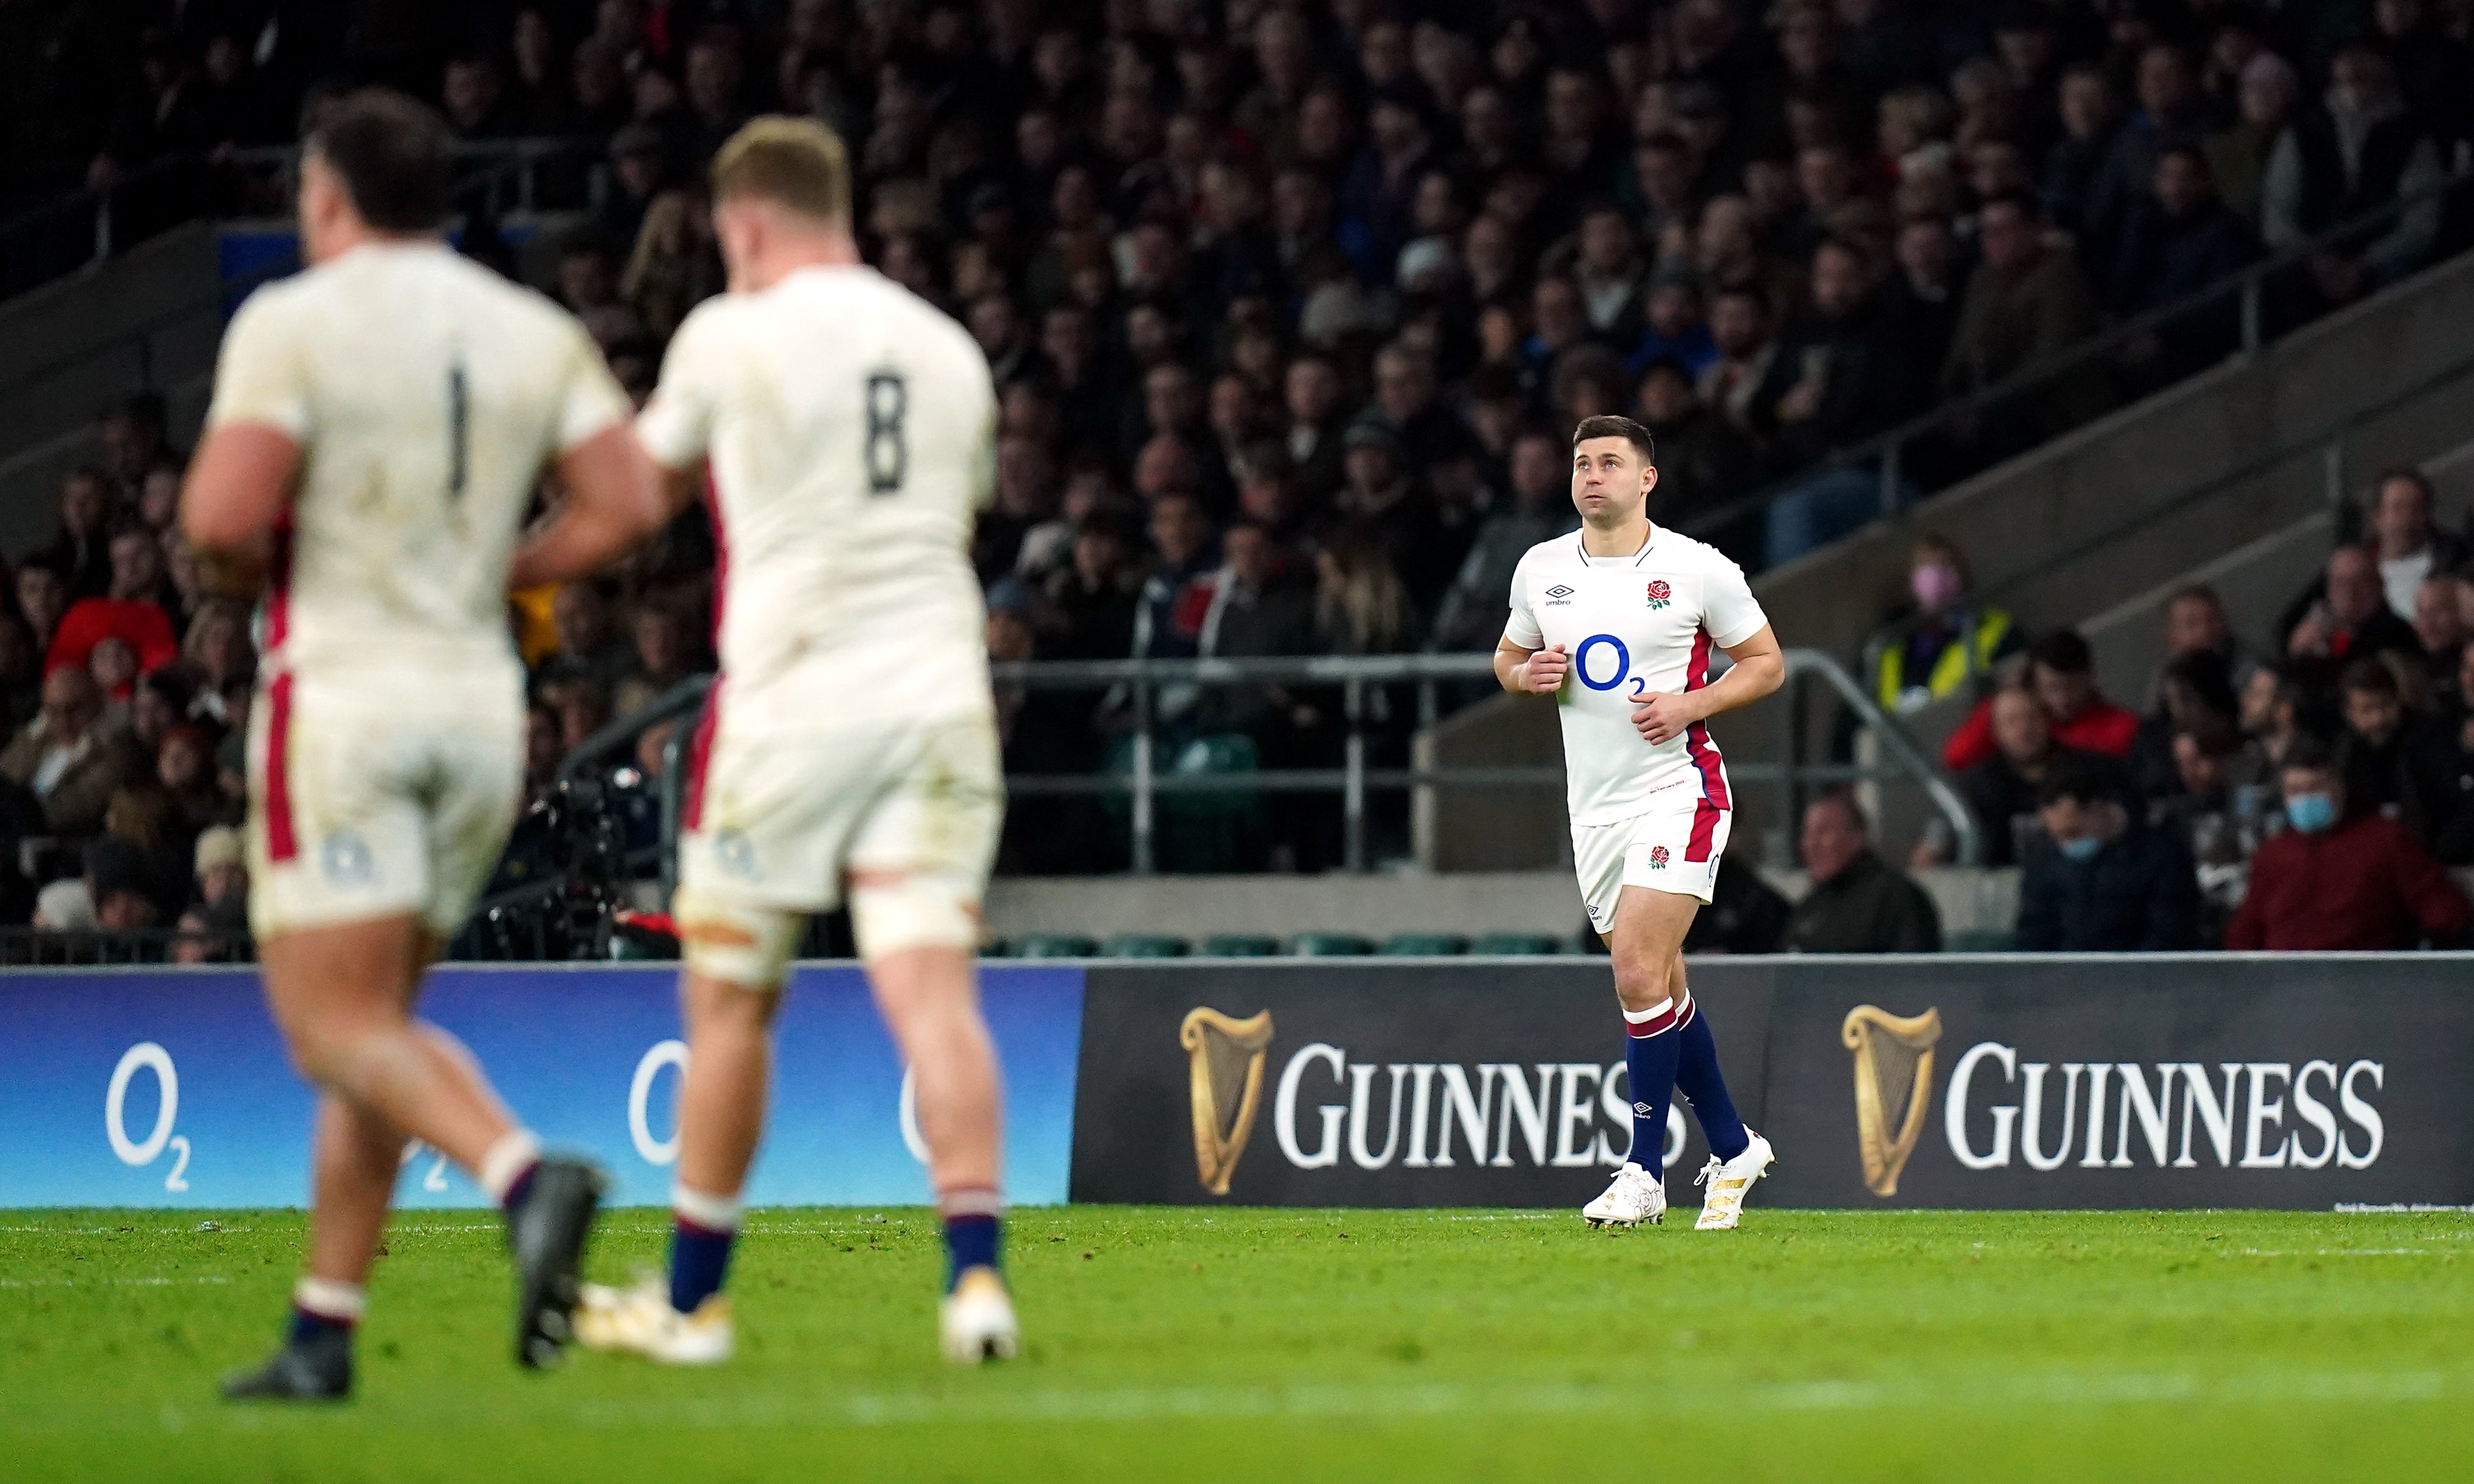 England’s Ben Youngs cames on against Wales for a record-breaking 115th cap